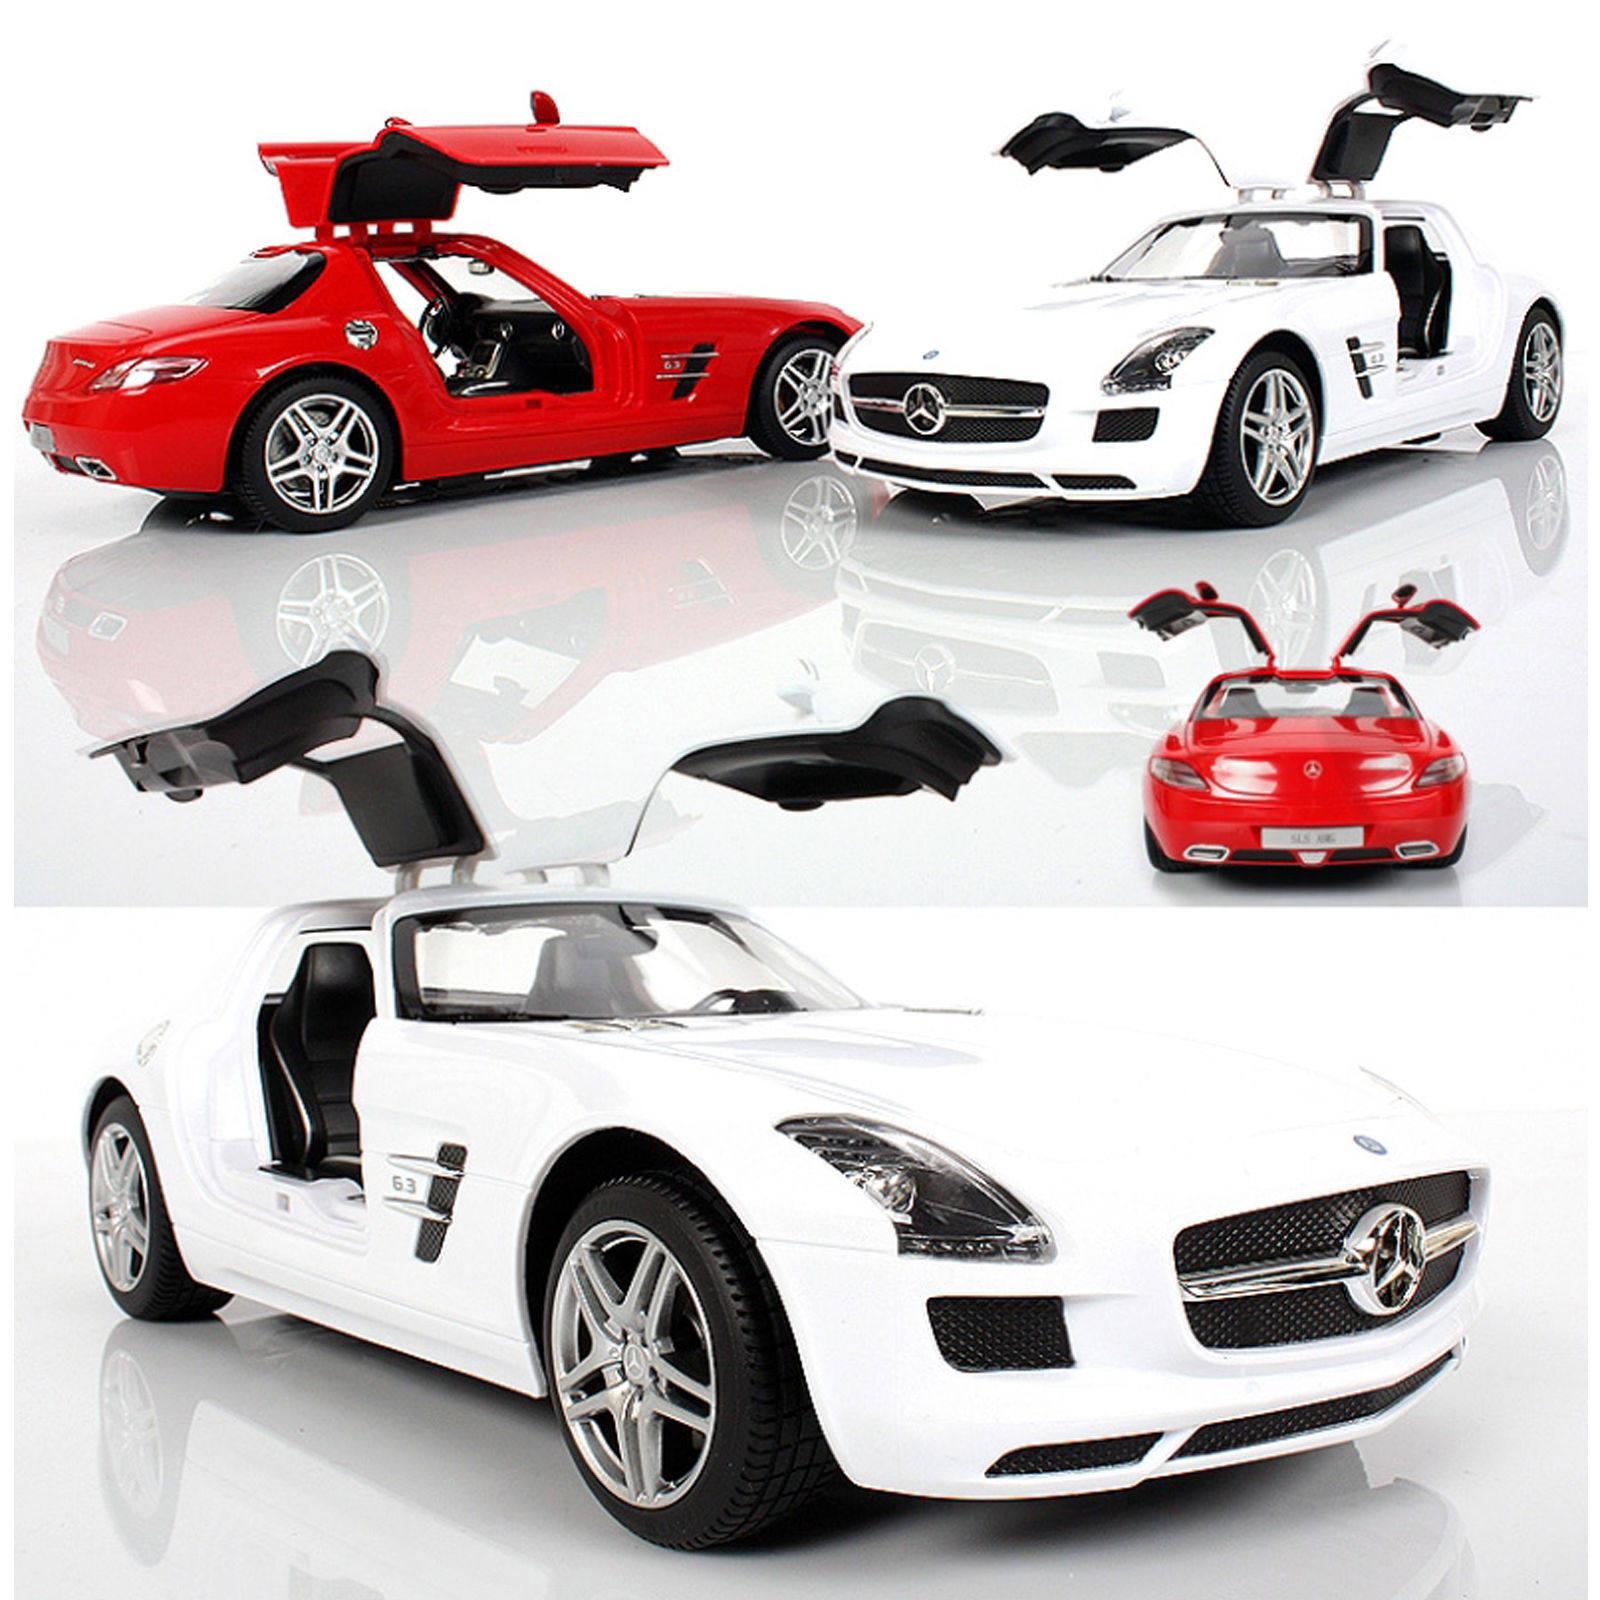 http://www.mad-toys.com/images/catalog_images/1443848729.jpg